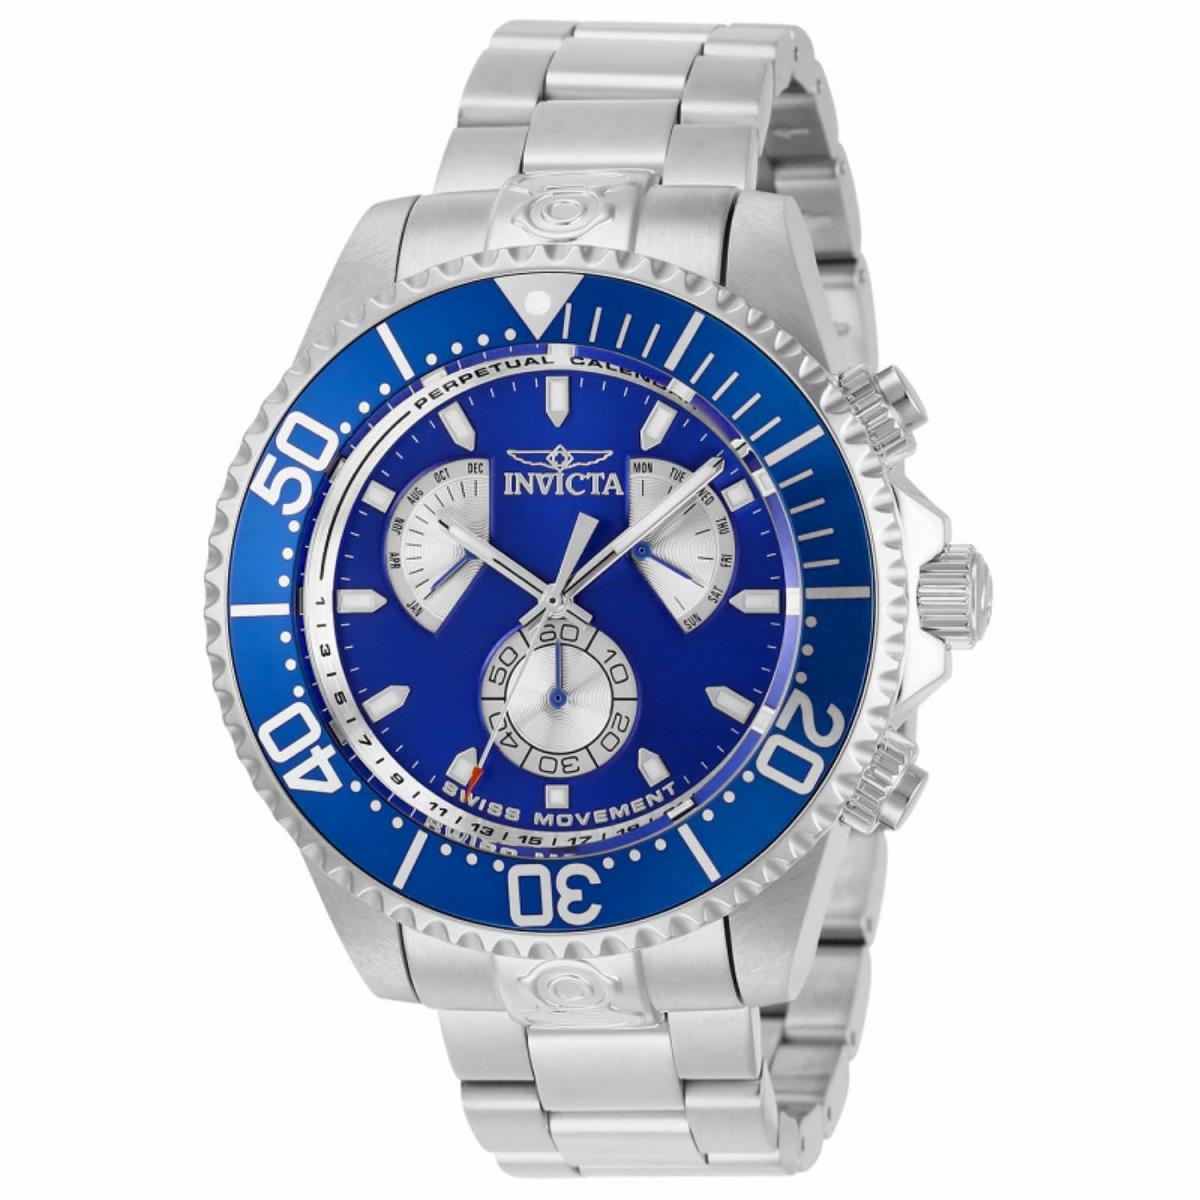 Invicta 29971 Grand Diver 47mm Perpetual Calendar Stainless Steel Bracelet Watch